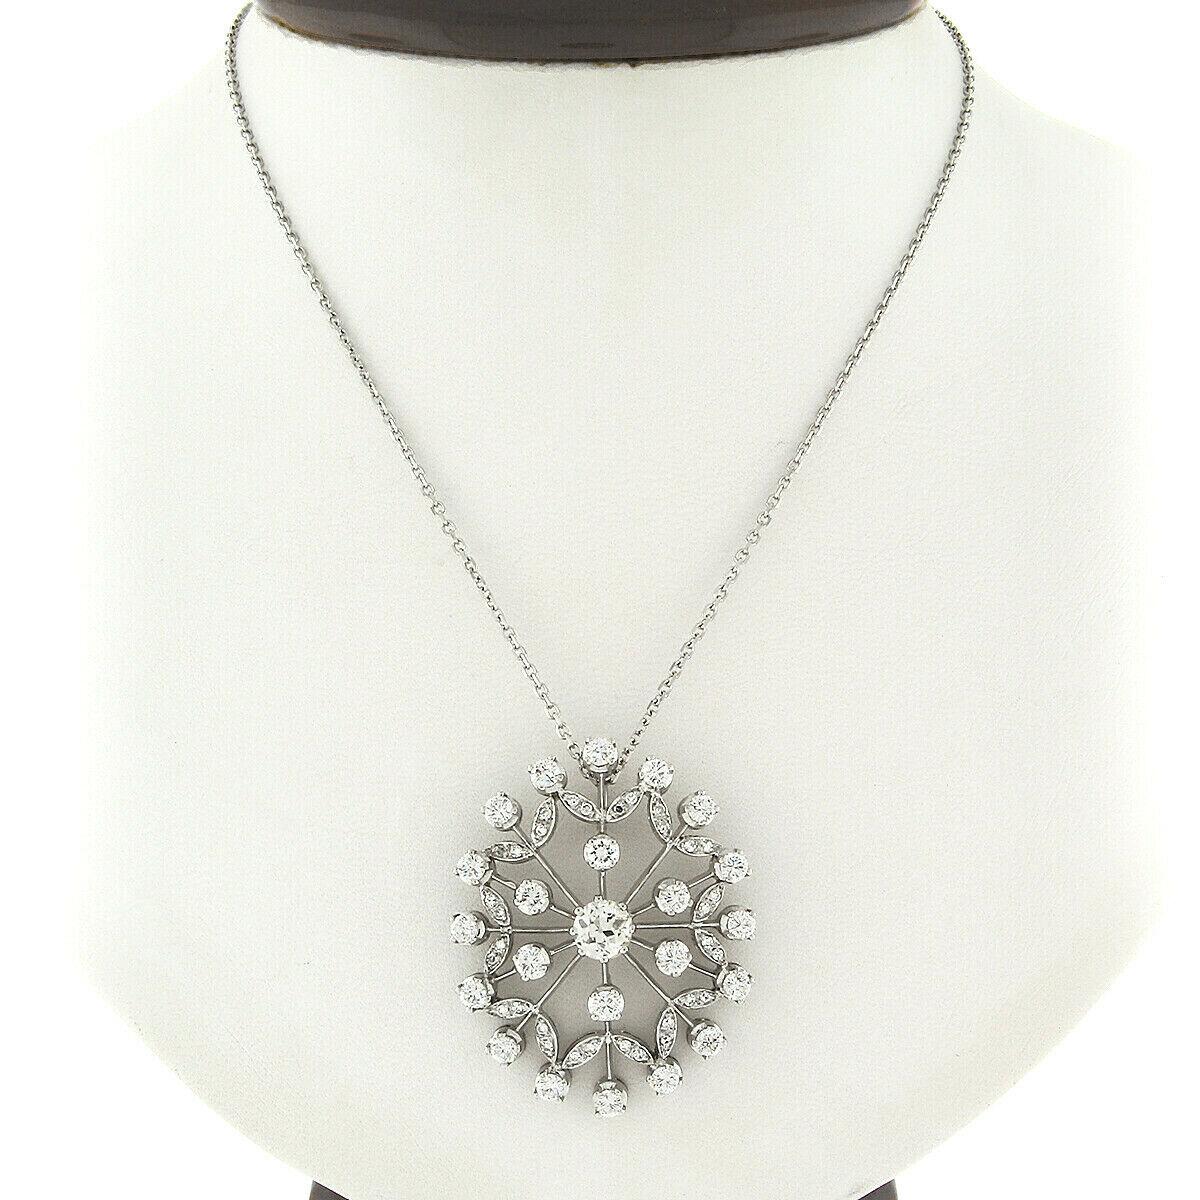 This gorgeous, vintage, floral snowflake pendant was crafted from solid 18k white gold. It features an old European cut diamond multi-prong set at its center weighing approximately 0.80 carats. It is very fine quality with faint yellow K color and